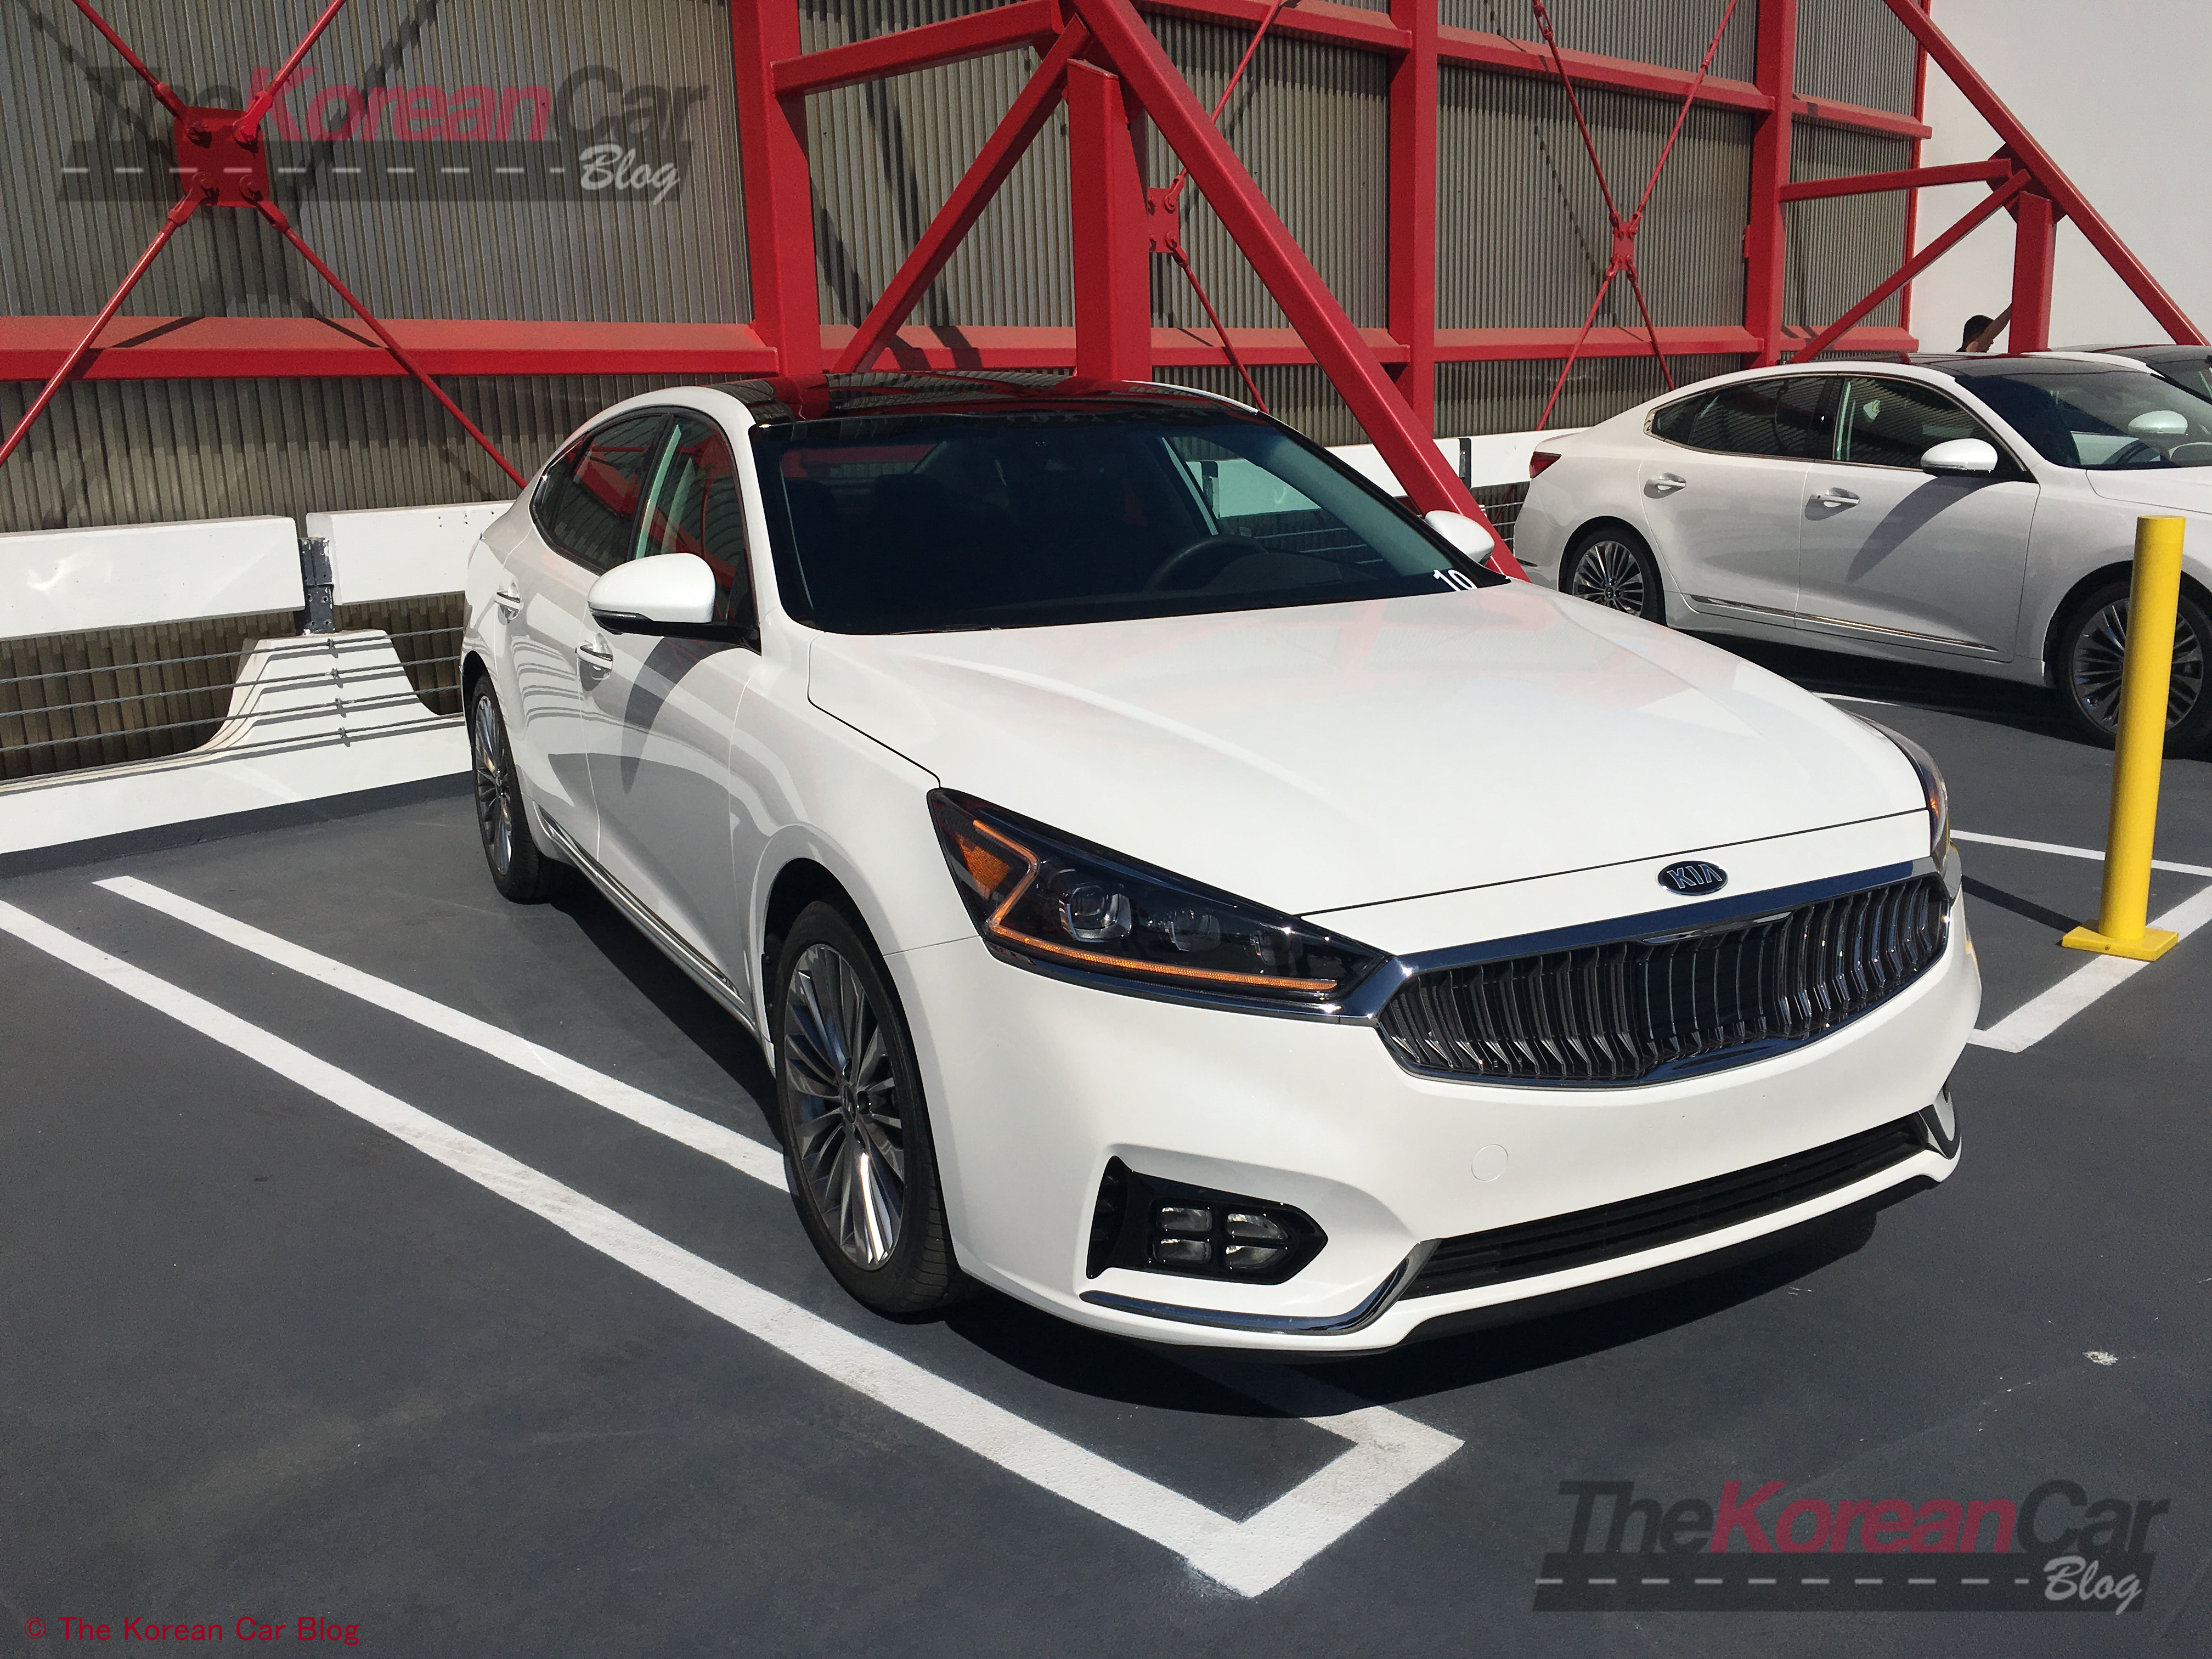 The All-New 2017 Cadenza Review